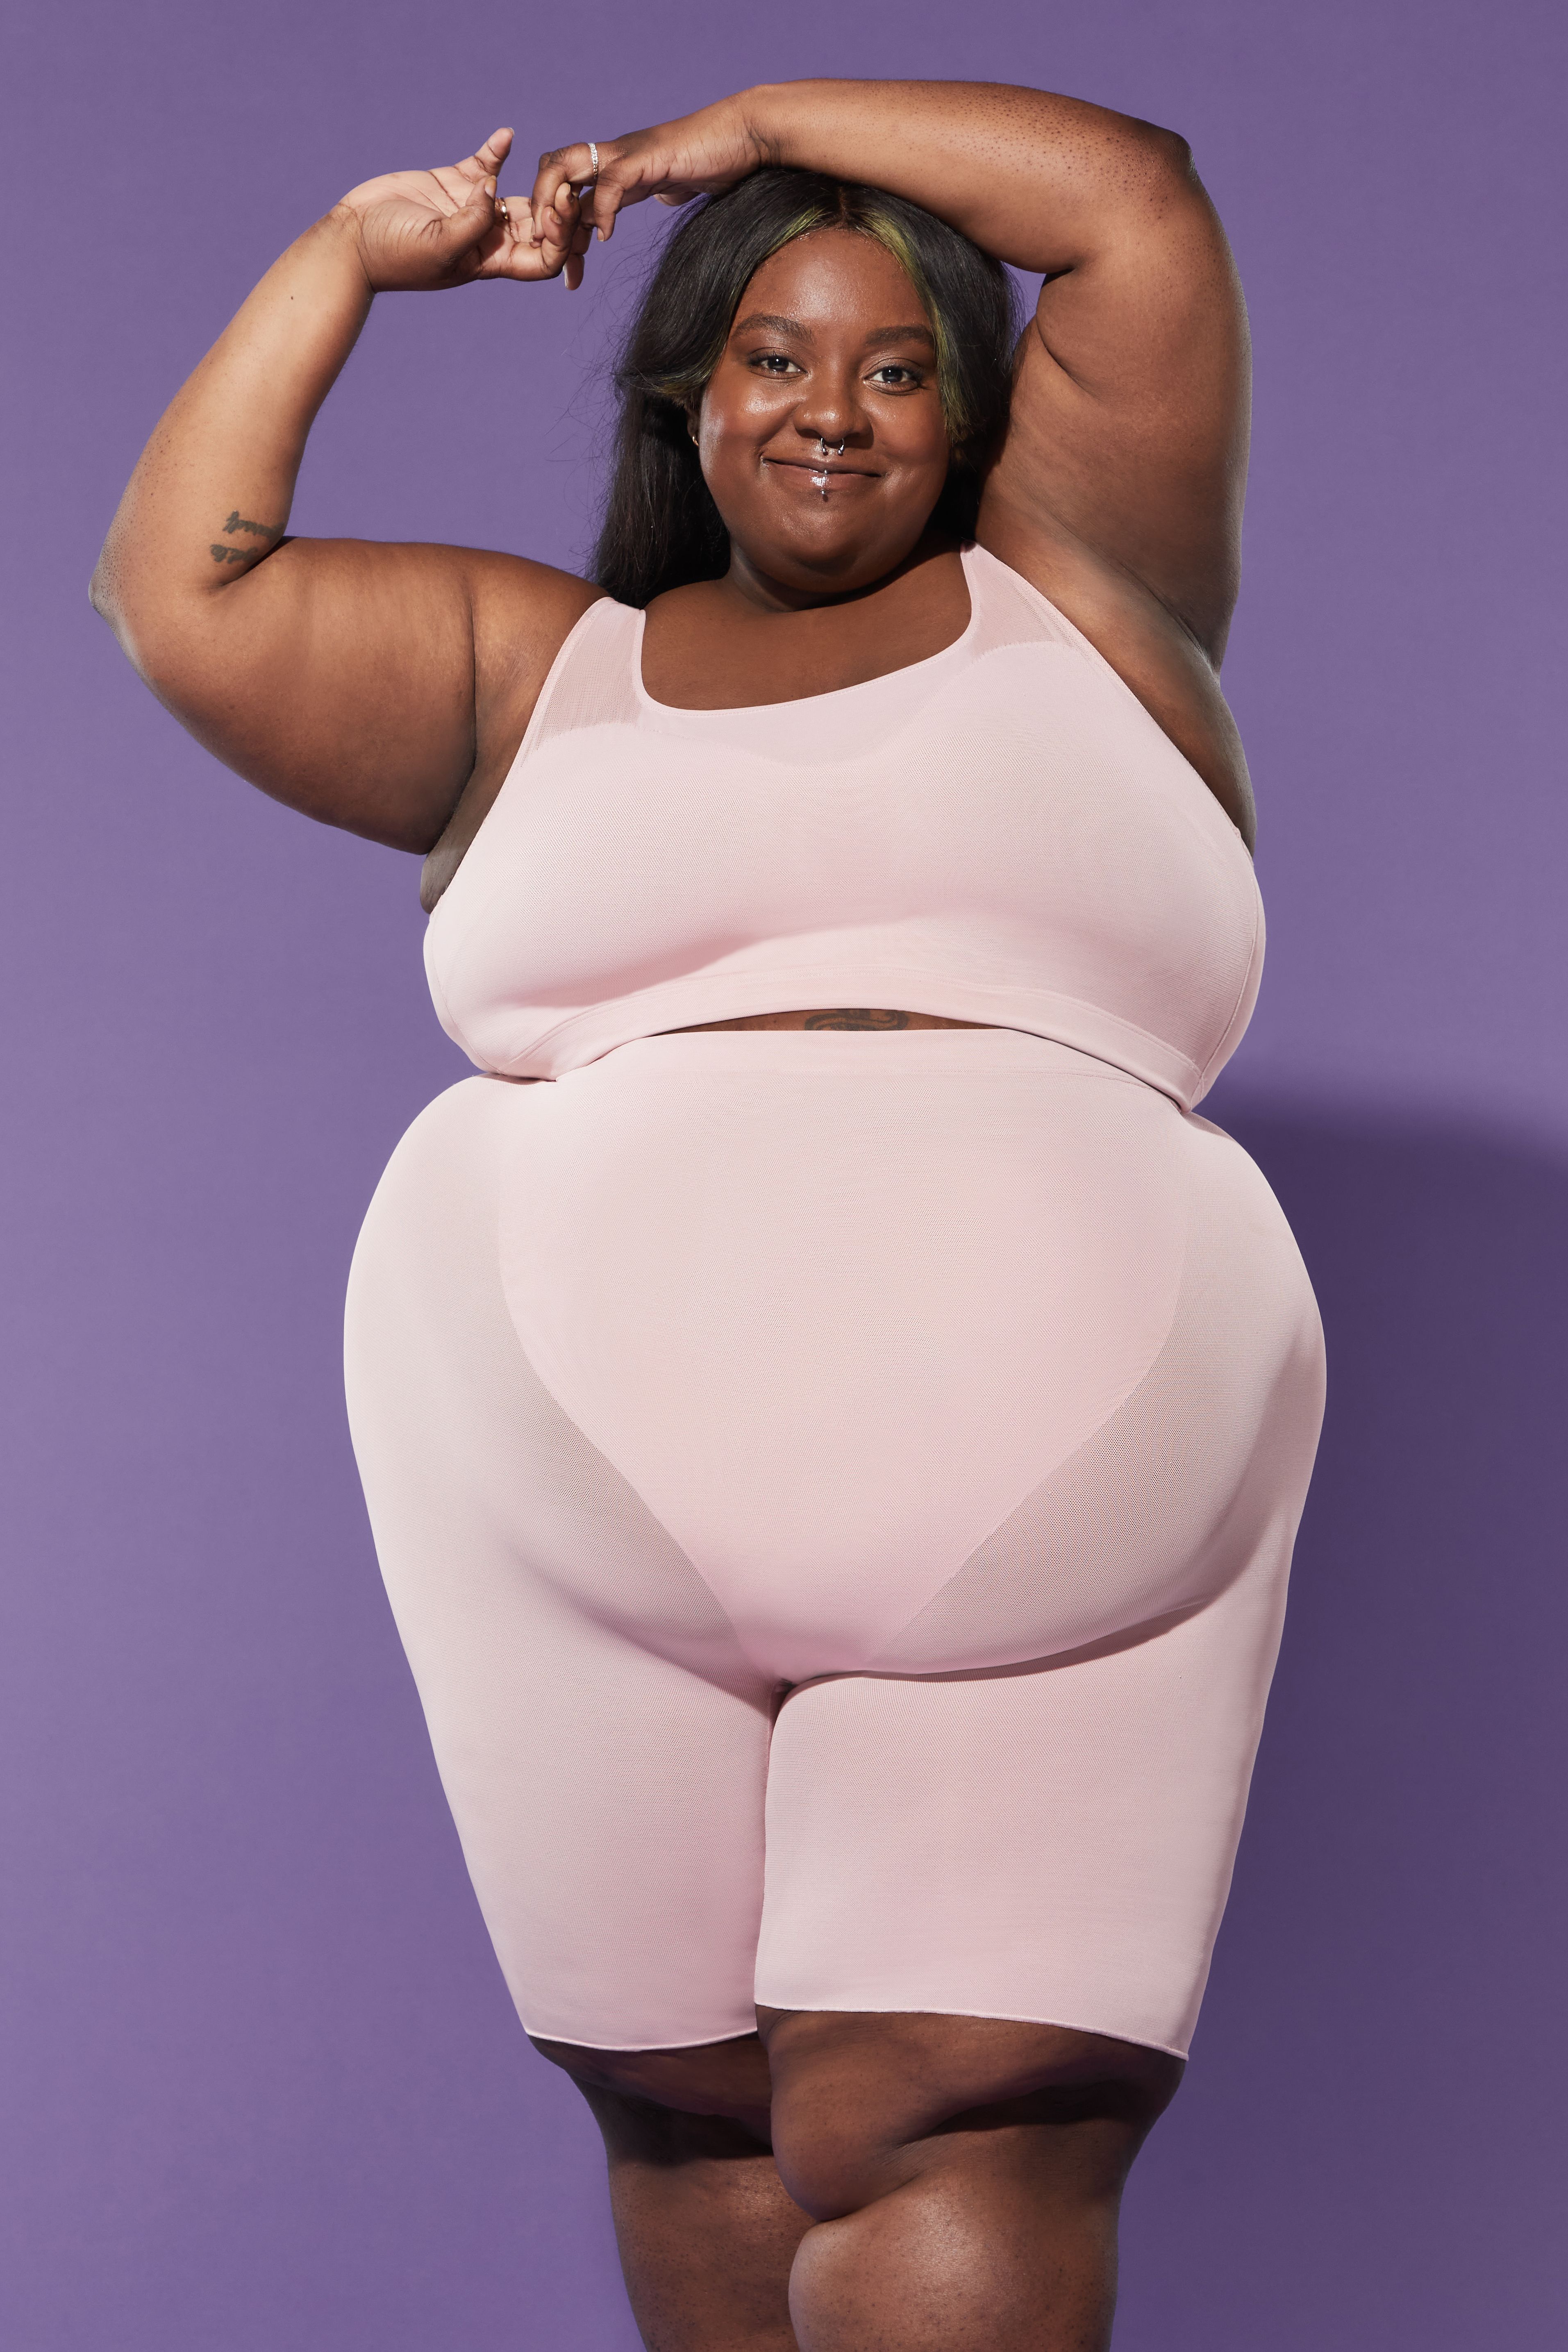 Why Lizzo's Brand YITTY is Redefining Shapewear